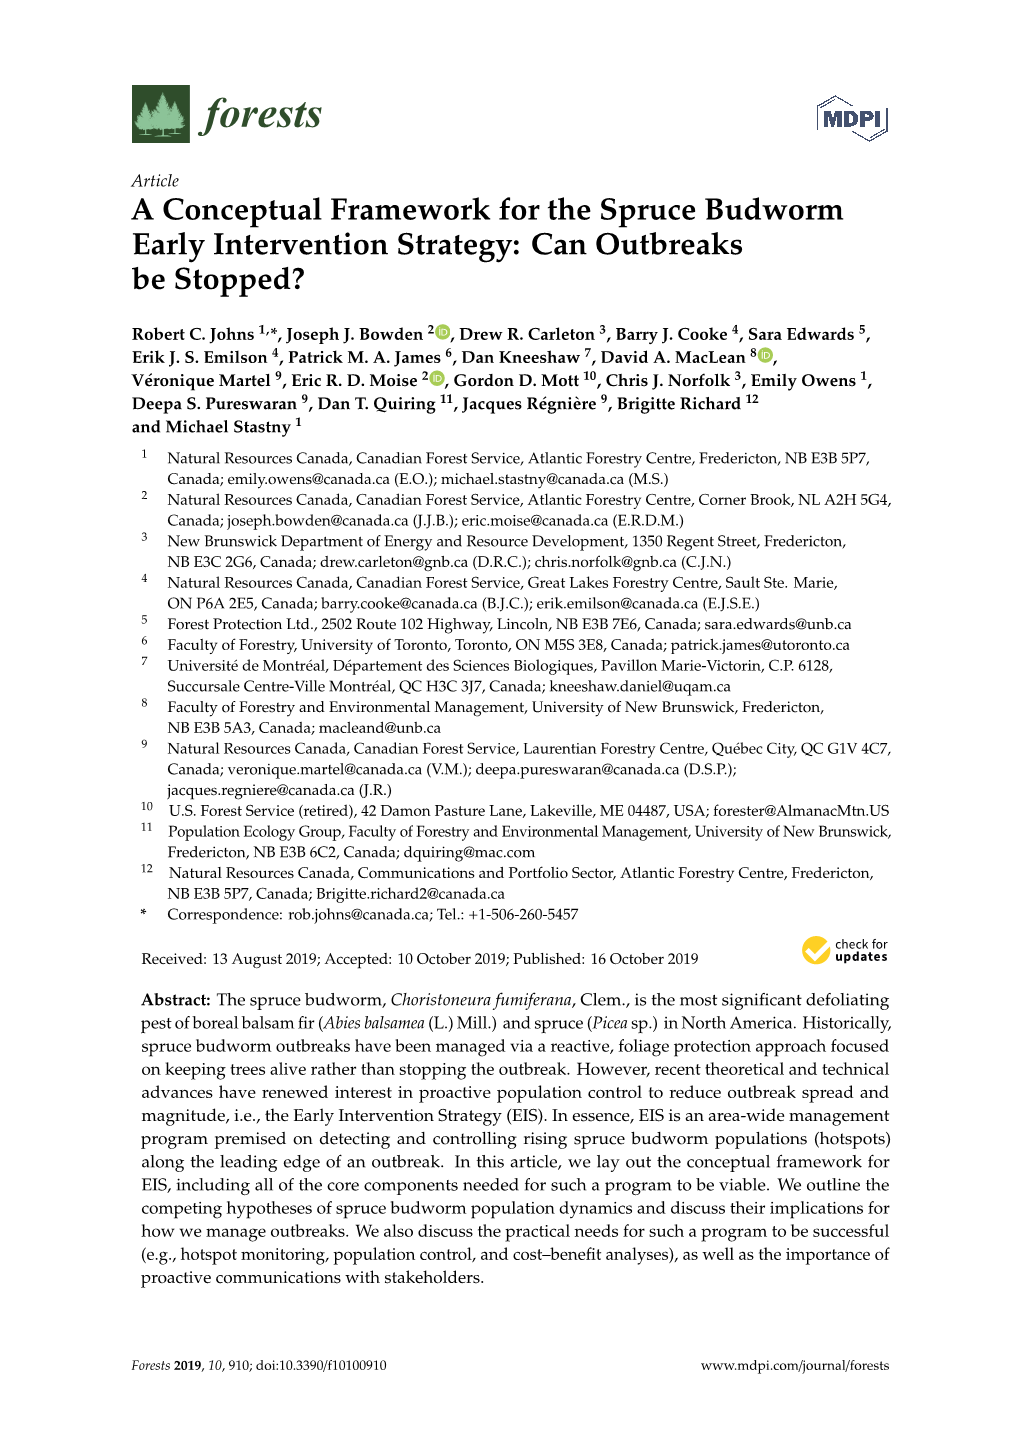 A Conceptual Framework for the Spruce Budworm Early Intervention Strategy: Can Outbreaks Be Stopped?